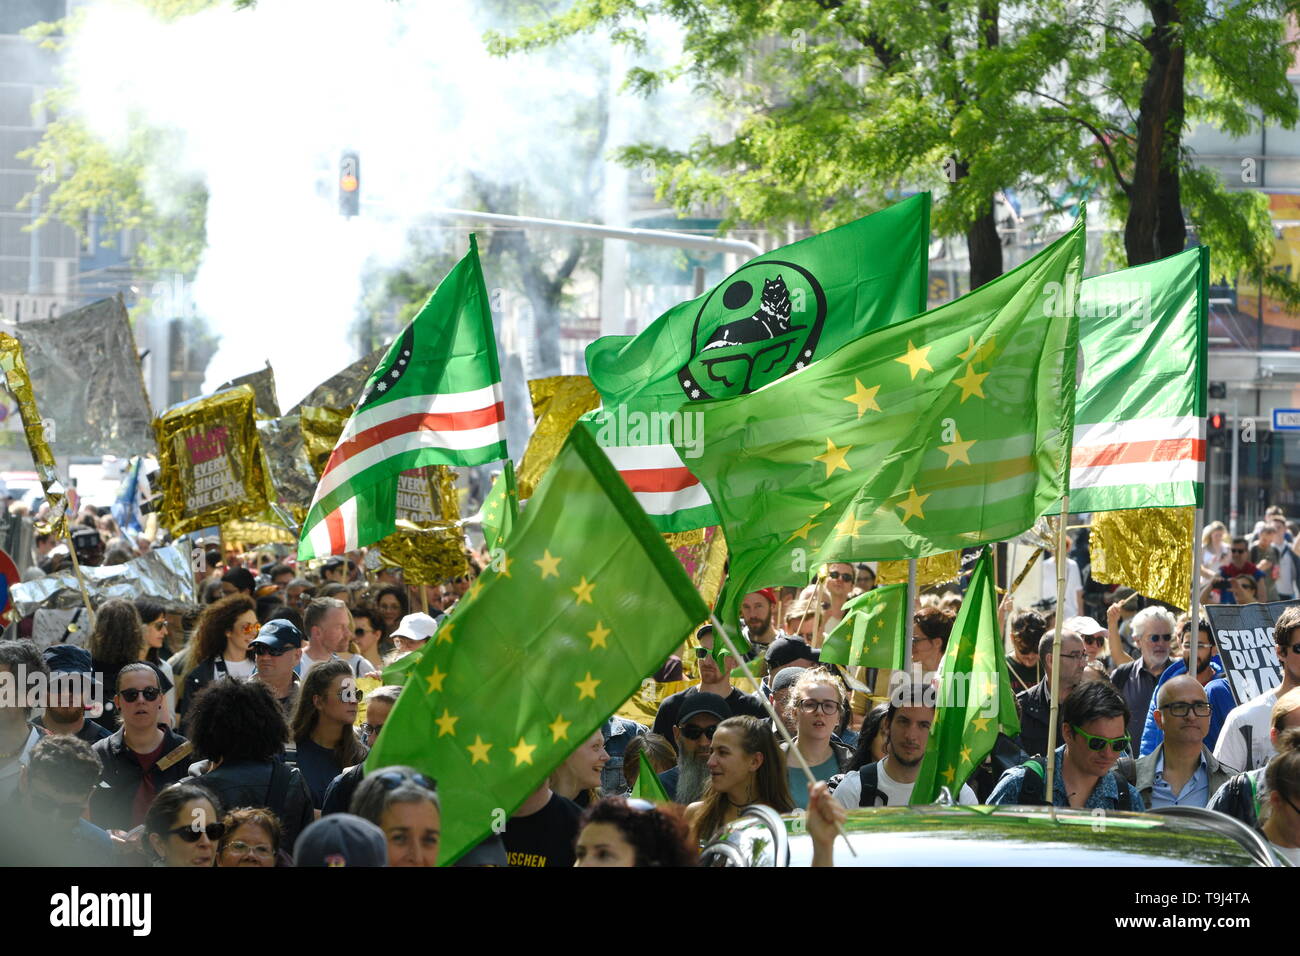 Vienna, Austria. 19th May 2019. Europe-wide demonstration for the EU elections. The demonstration in Vienna starts on 19th May 2019 at the Christan Broda square. The demonstration was against nationalist parties and authoritarian politics in the European Union. Image shows green European flags.  Credit: Franz Perc/Alamy Live News Stock Photo